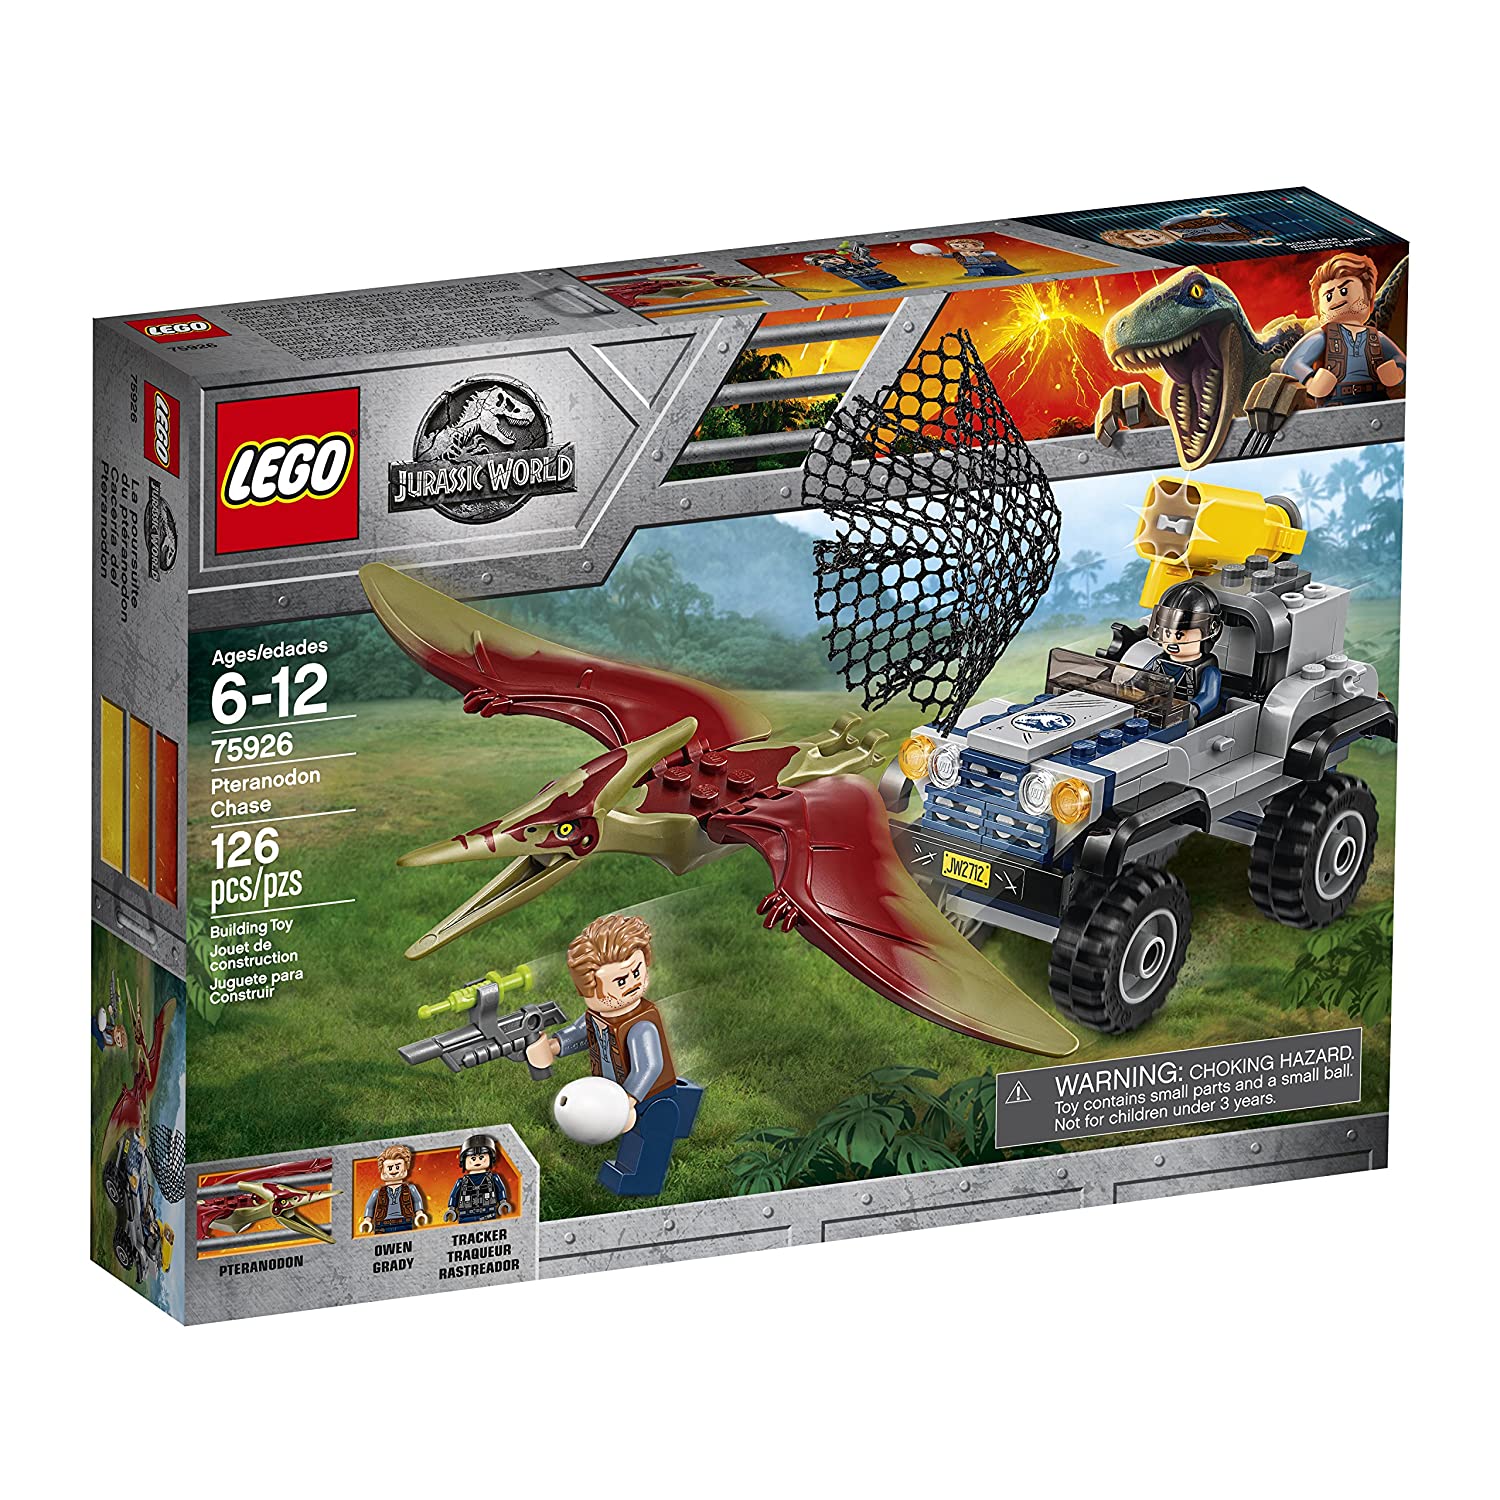 Top 9 Best Lego Jurassic Park Sets Reviews in 2023 5